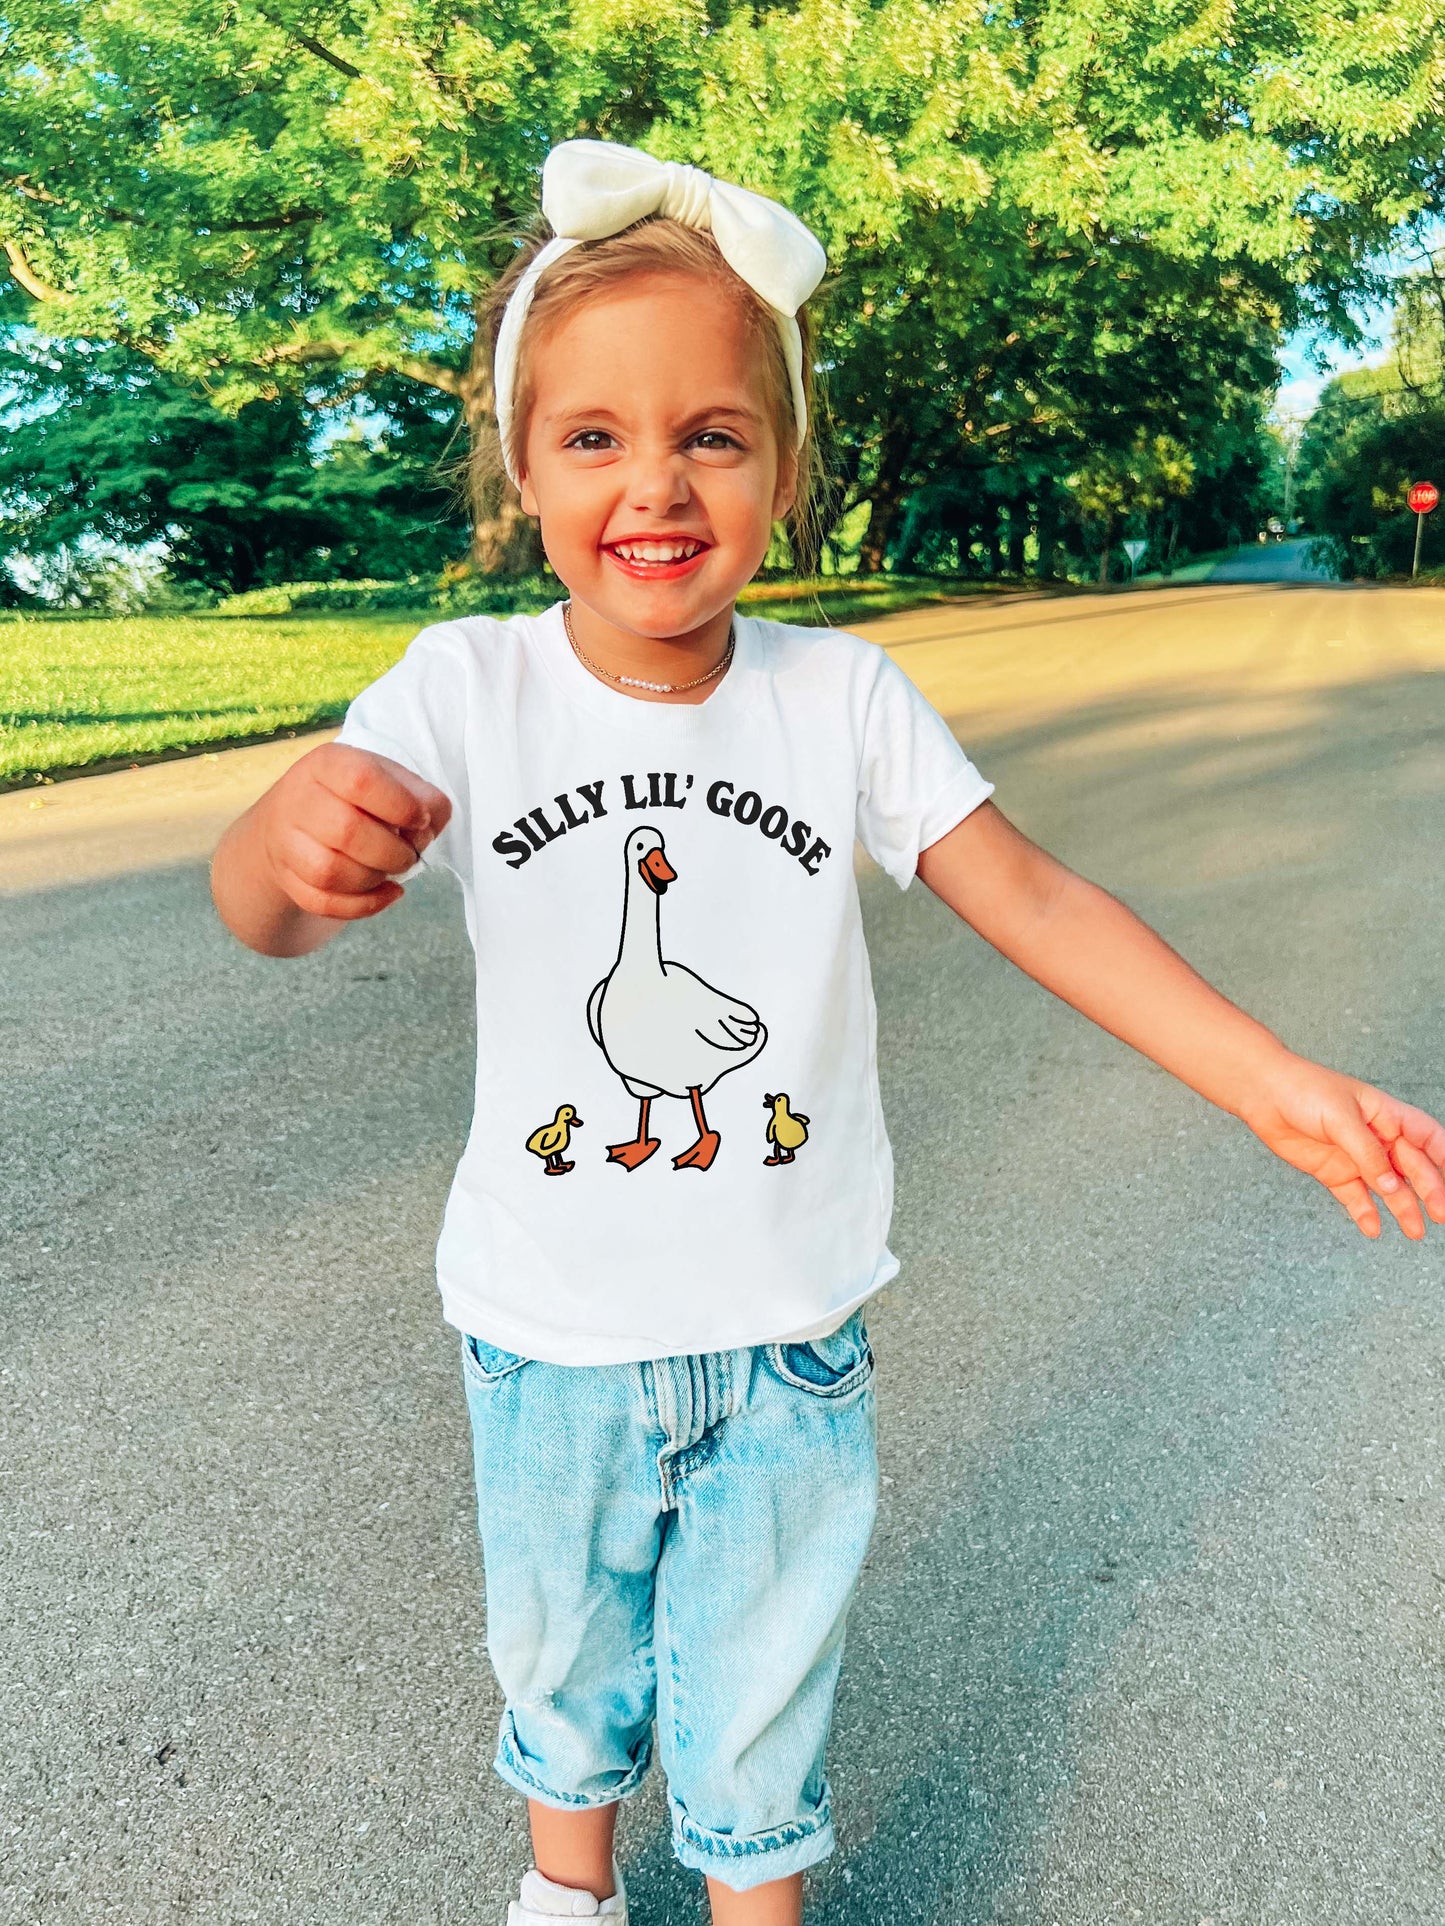 'Silly lil Goose' Kid's Goose T-shirt